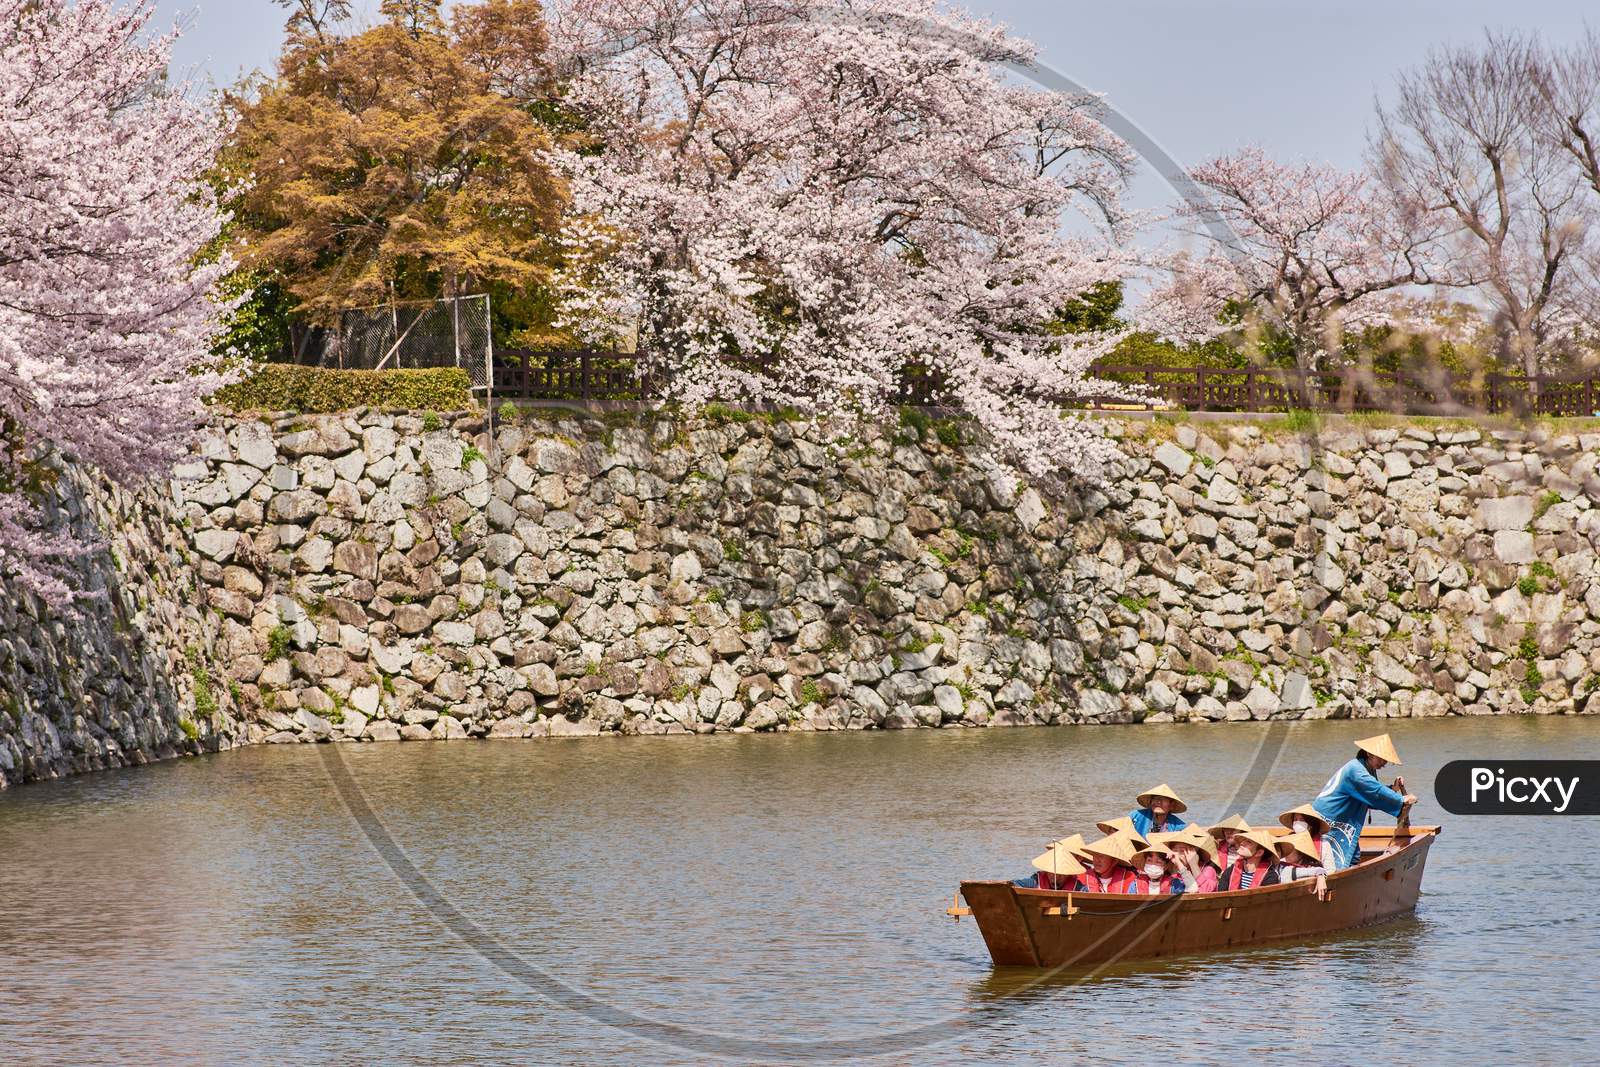 People In A Tourist Boat In Himeji Castle Water Moat Admiring The Blooming Cherry Blossom Trees During The Sakura Season In Himeji, Japan